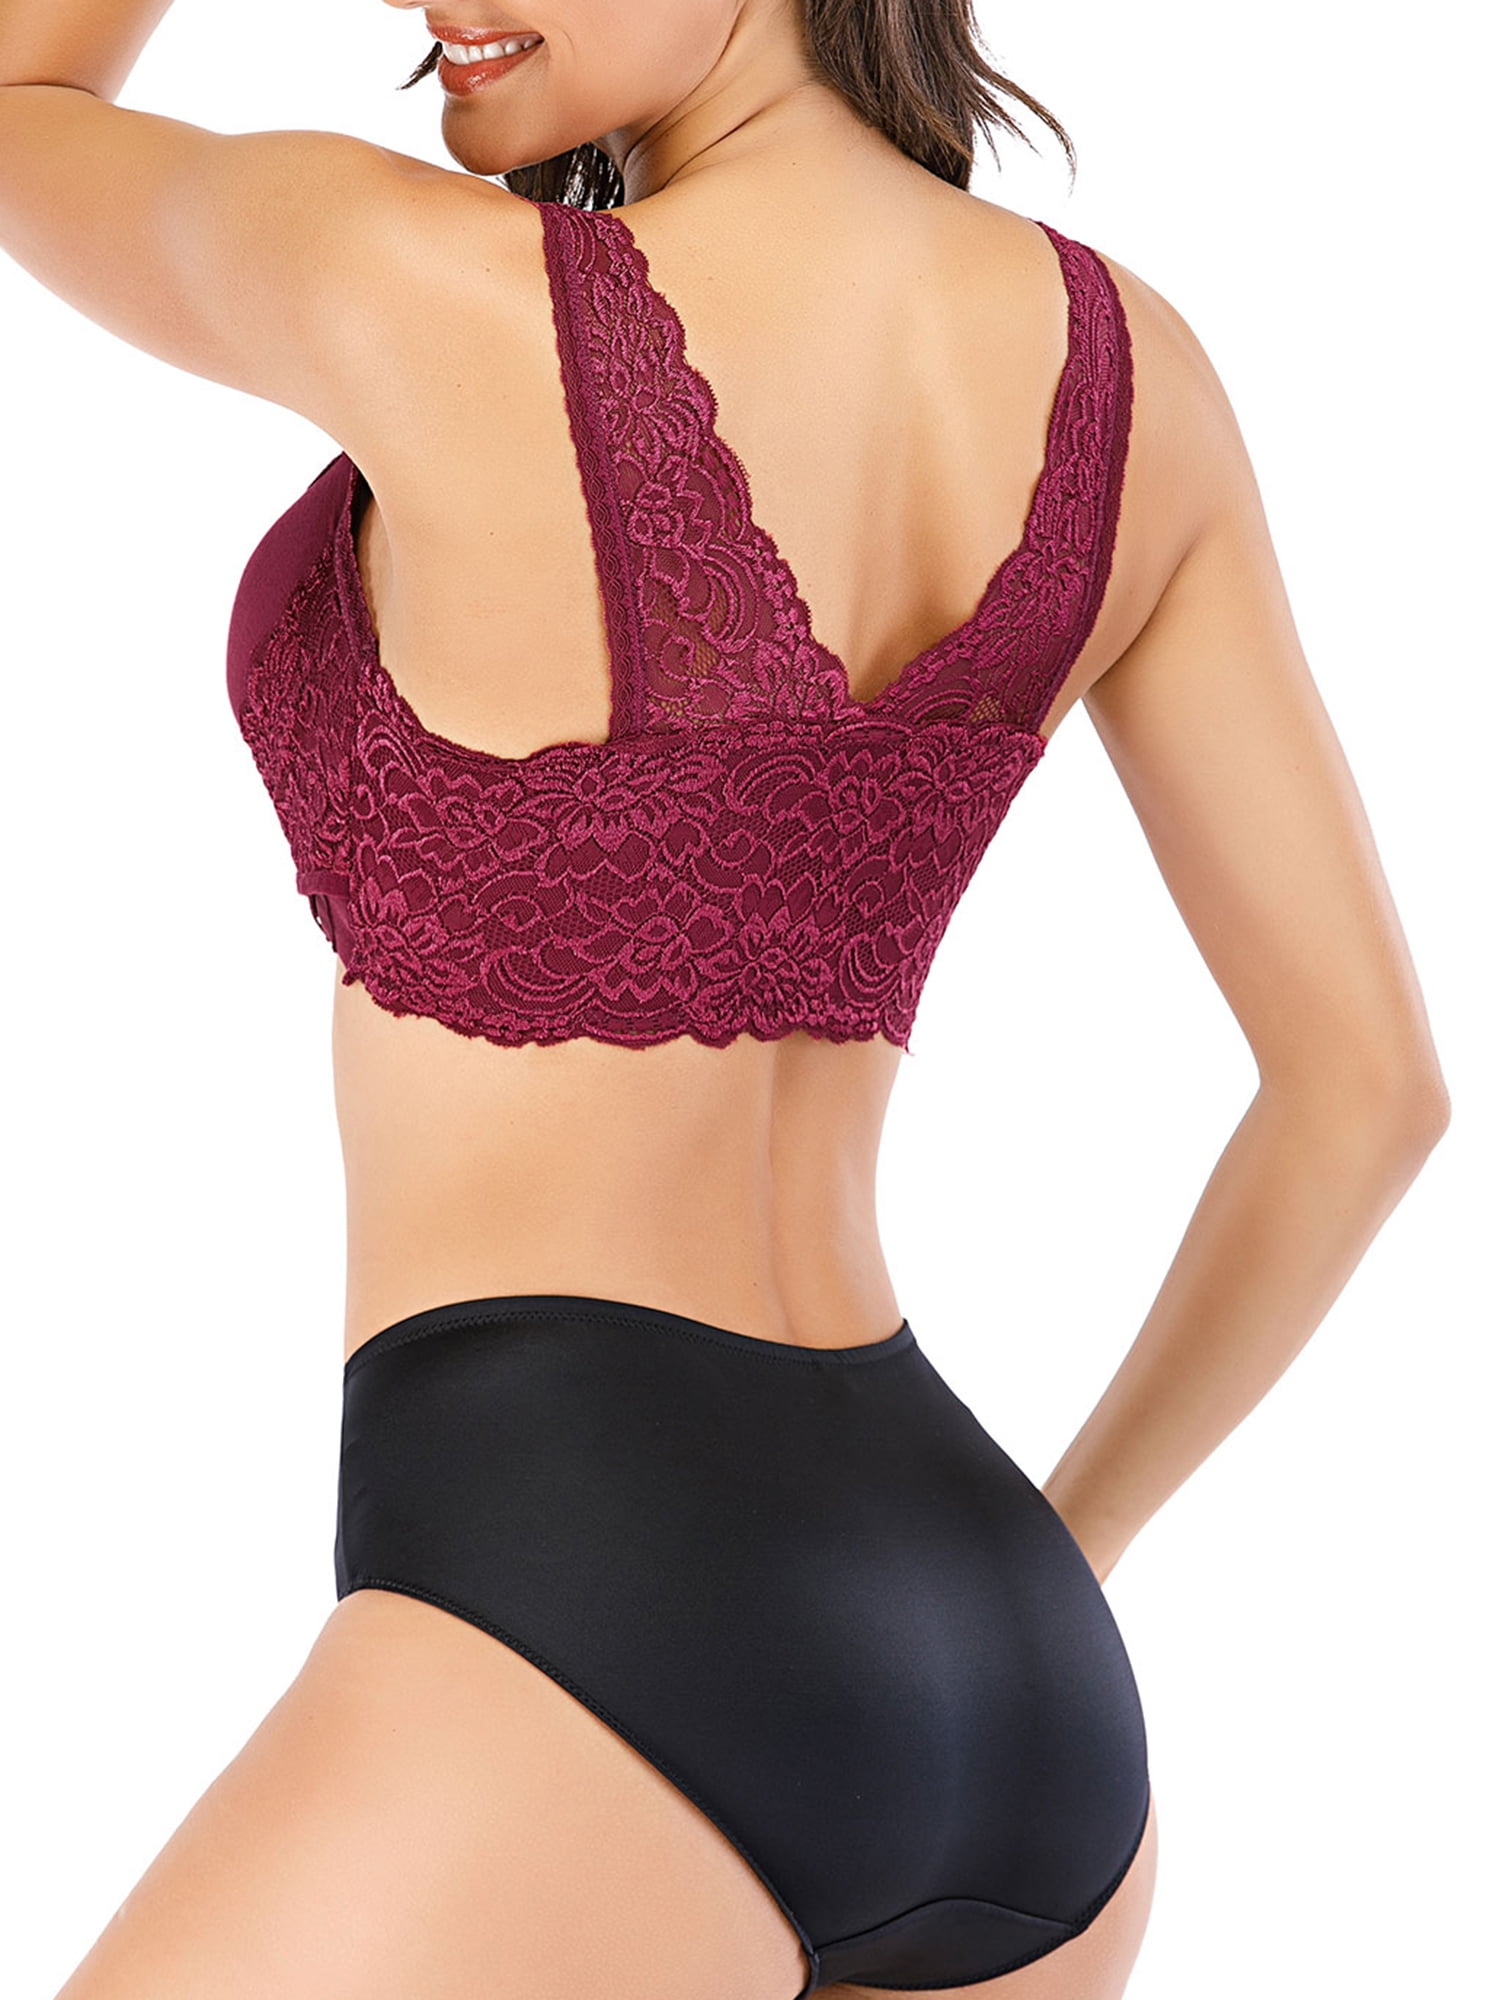 Youloveit Youloveit Womens Lace Bras Sports Bras Cross Front Side